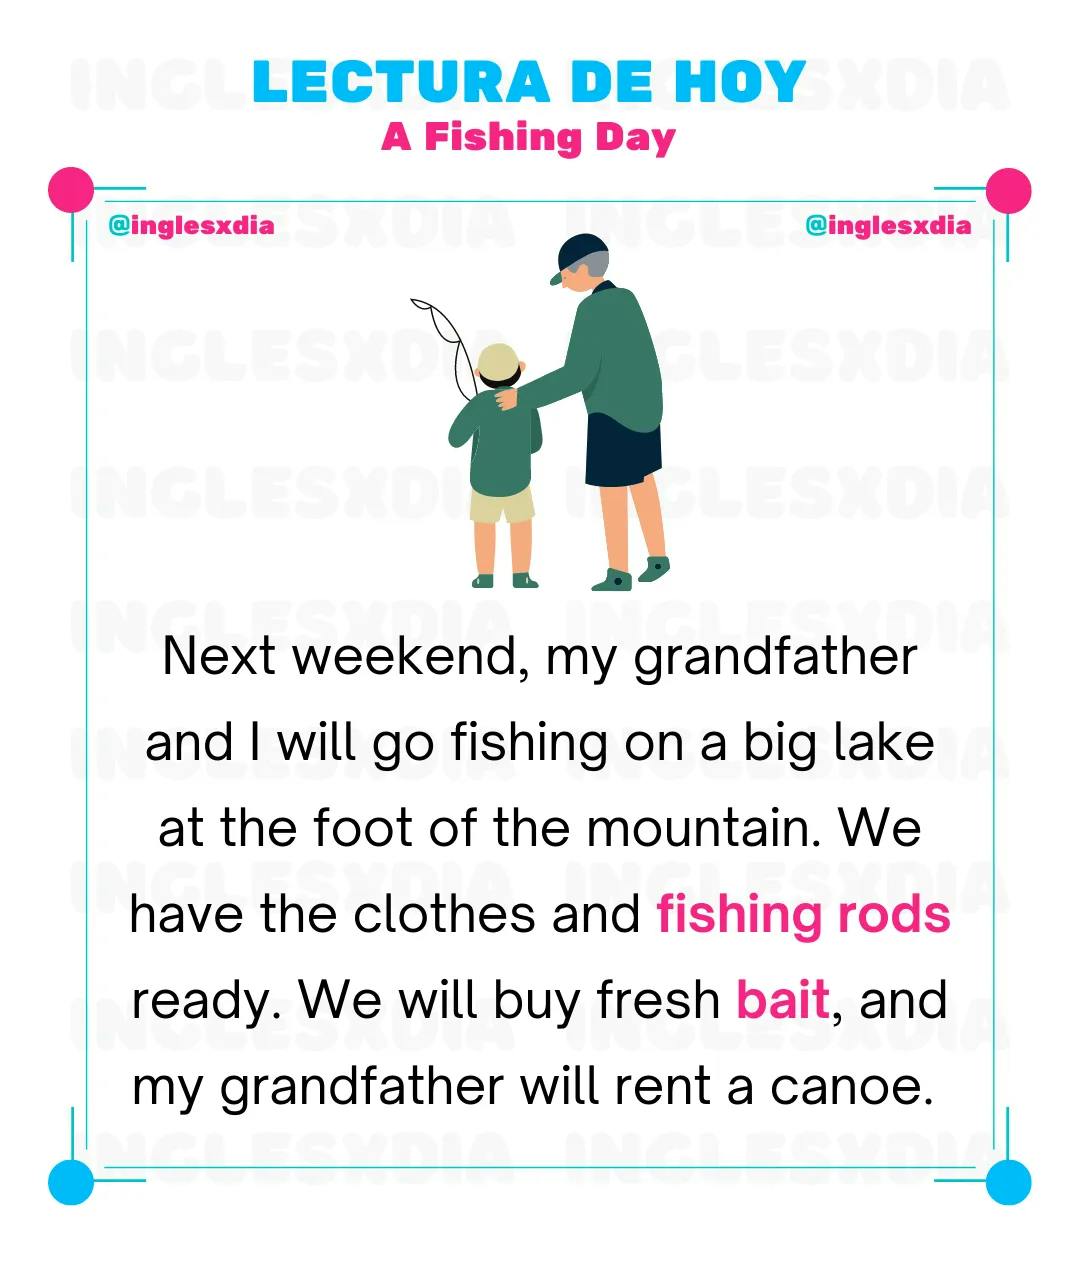 A Fishing Day